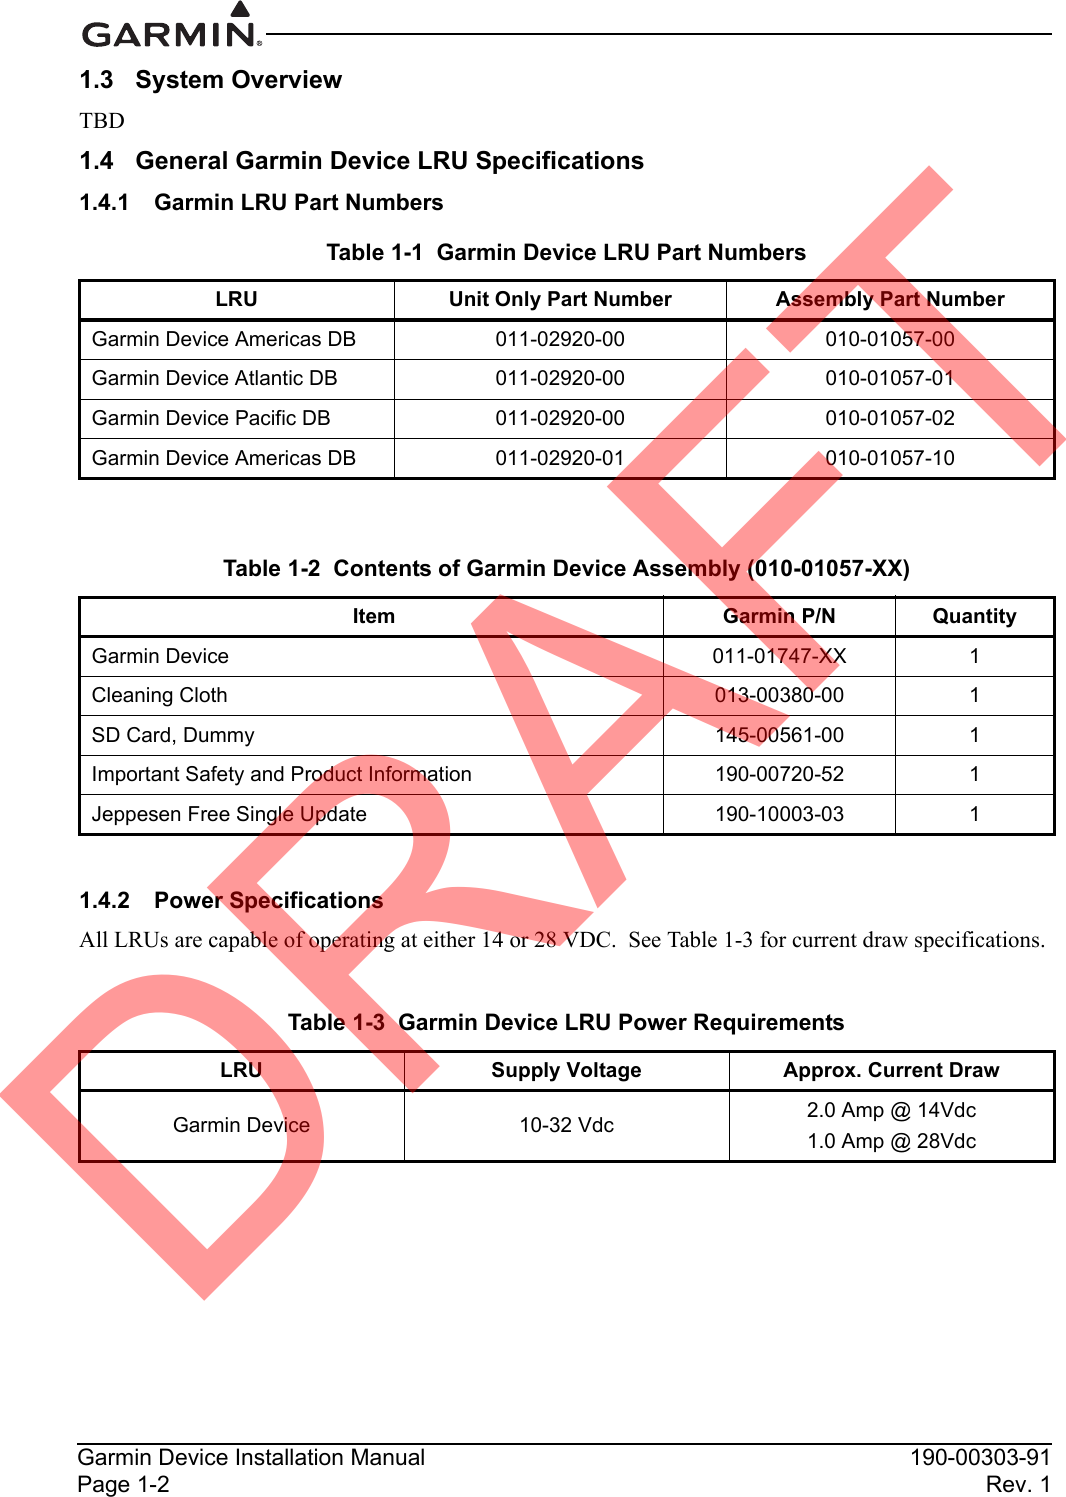 Garmin Device Installation Manual 190-00303-91Page 1-2 Rev. 11.3 System OverviewTBD1.4 General Garmin Device LRU Specifications1.4.1 Garmin LRU Part Numbers1.4.2 Power SpecificationsAll LRUs are capable of operating at either 14 or 28 VDC.  See Table 1-3 for current draw specifications.Table 1-1  Garmin Device LRU Part NumbersLRU Unit Only Part Number Assembly Part NumberGarmin Device Americas DB 011-02920-00 010-01057-00Garmin Device Atlantic DB 011-02920-00 010-01057-01Garmin Device Pacific DB 011-02920-00 010-01057-02Garmin Device Americas DB 011-02920-01 010-01057-10Table 1-2  Contents of Garmin Device Assembly (010-01057-XX) Item Garmin P/N QuantityGarmin Device 011-01747-XX 1Cleaning Cloth 013-00380-00 1SD Card, Dummy 145-00561-00 1Important Safety and Product Information 190-00720-52 1Jeppesen Free Single Update 190-10003-03 1Table 1-3  Garmin Device LRU Power RequirementsLRU Supply Voltage Approx. Current DrawGarmin Device 10-32 Vdc 2.0 Amp @ 14Vdc1.0 Amp @ 28VdcDRAFT